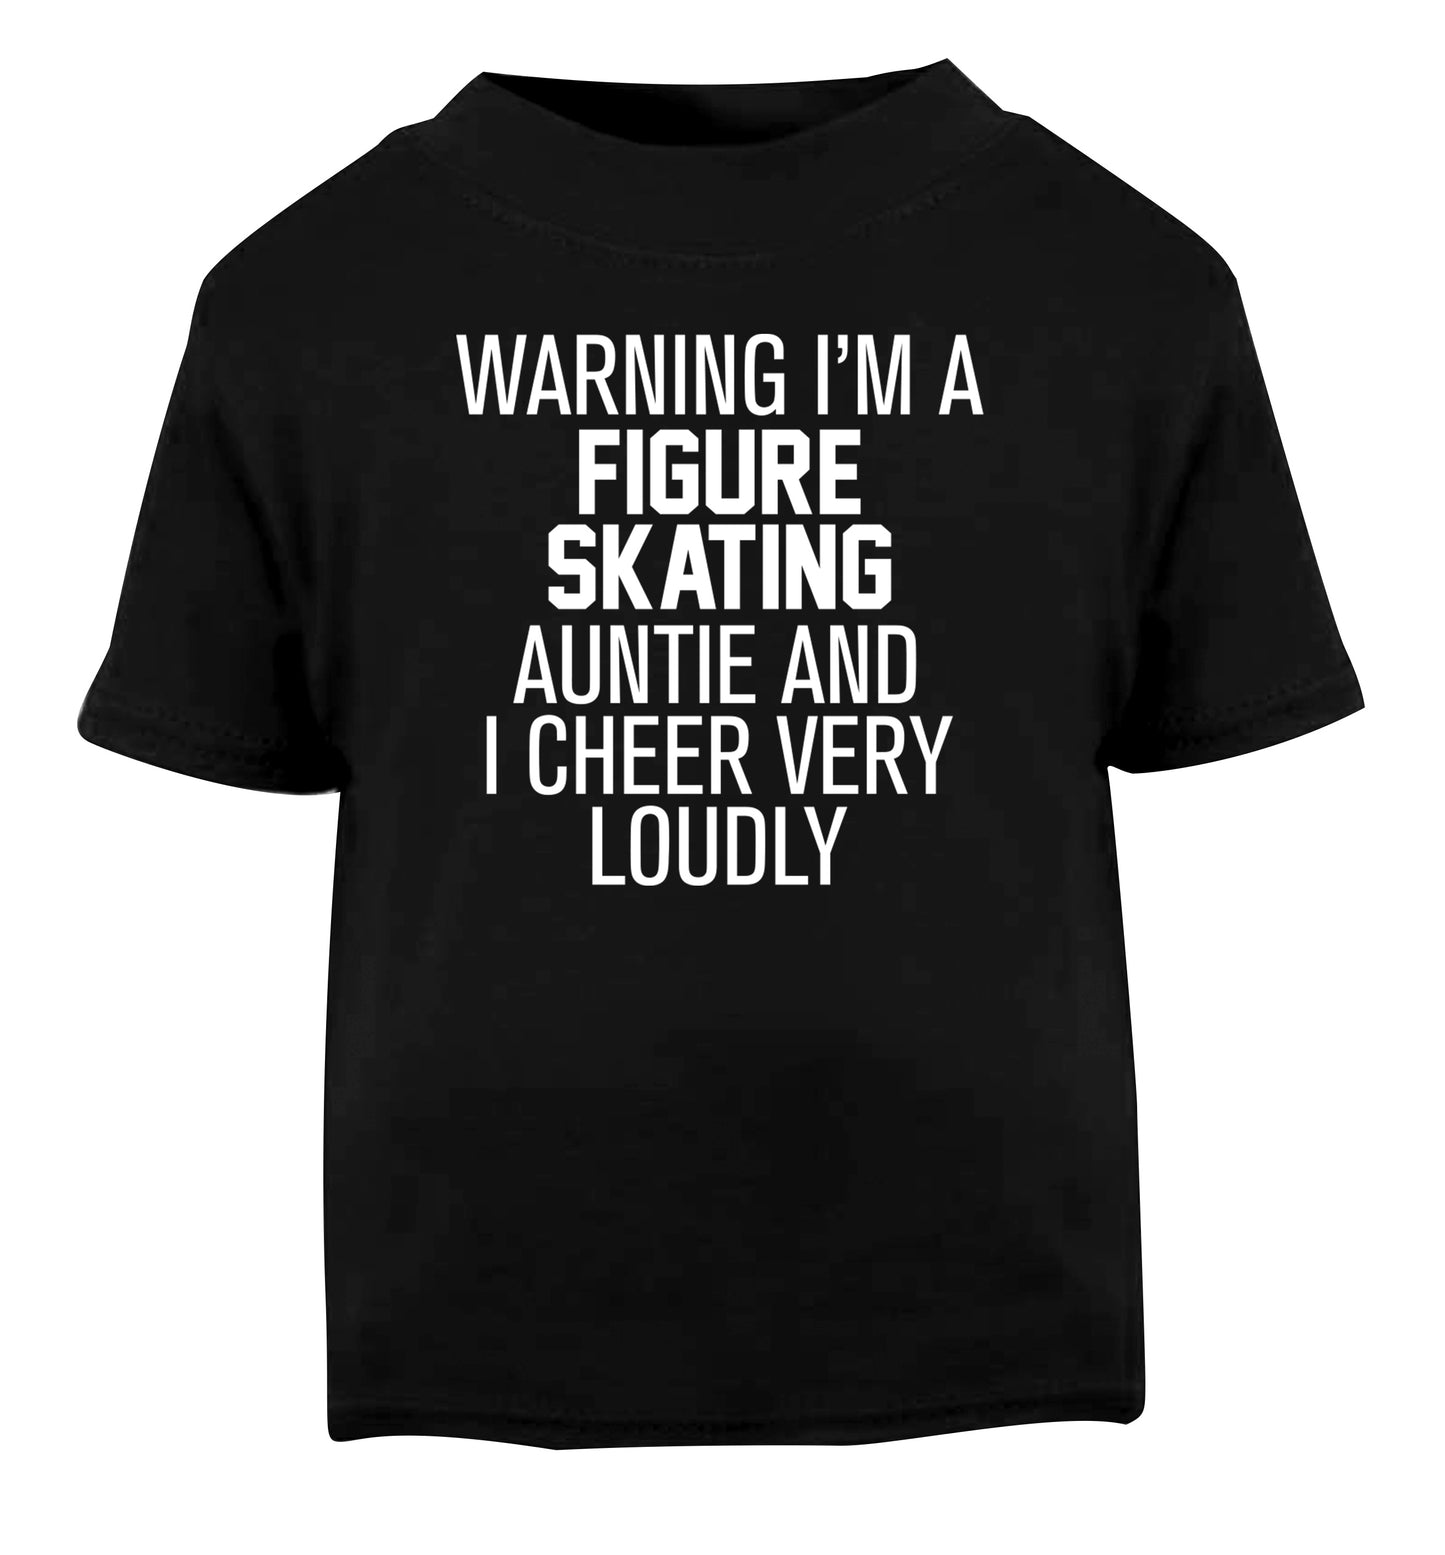 Warning I'm a figure skating auntie and I cheer very loudly Black Baby Toddler Tshirt 2 years